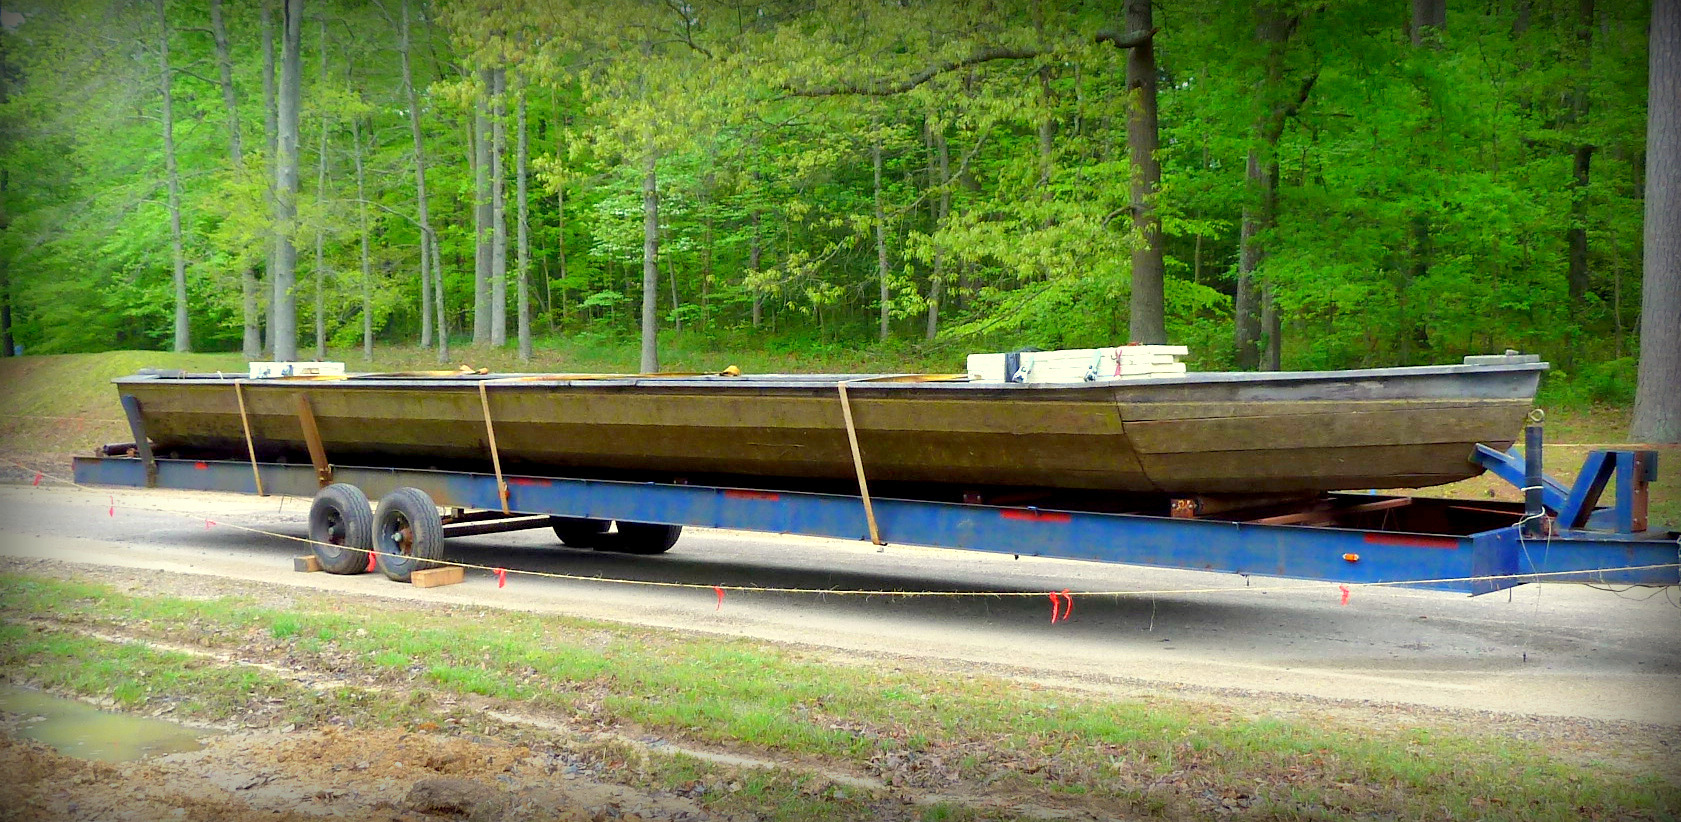 The Virginia Canal & Navigation Society provided a static demonstration of batteau navigation and functionality.